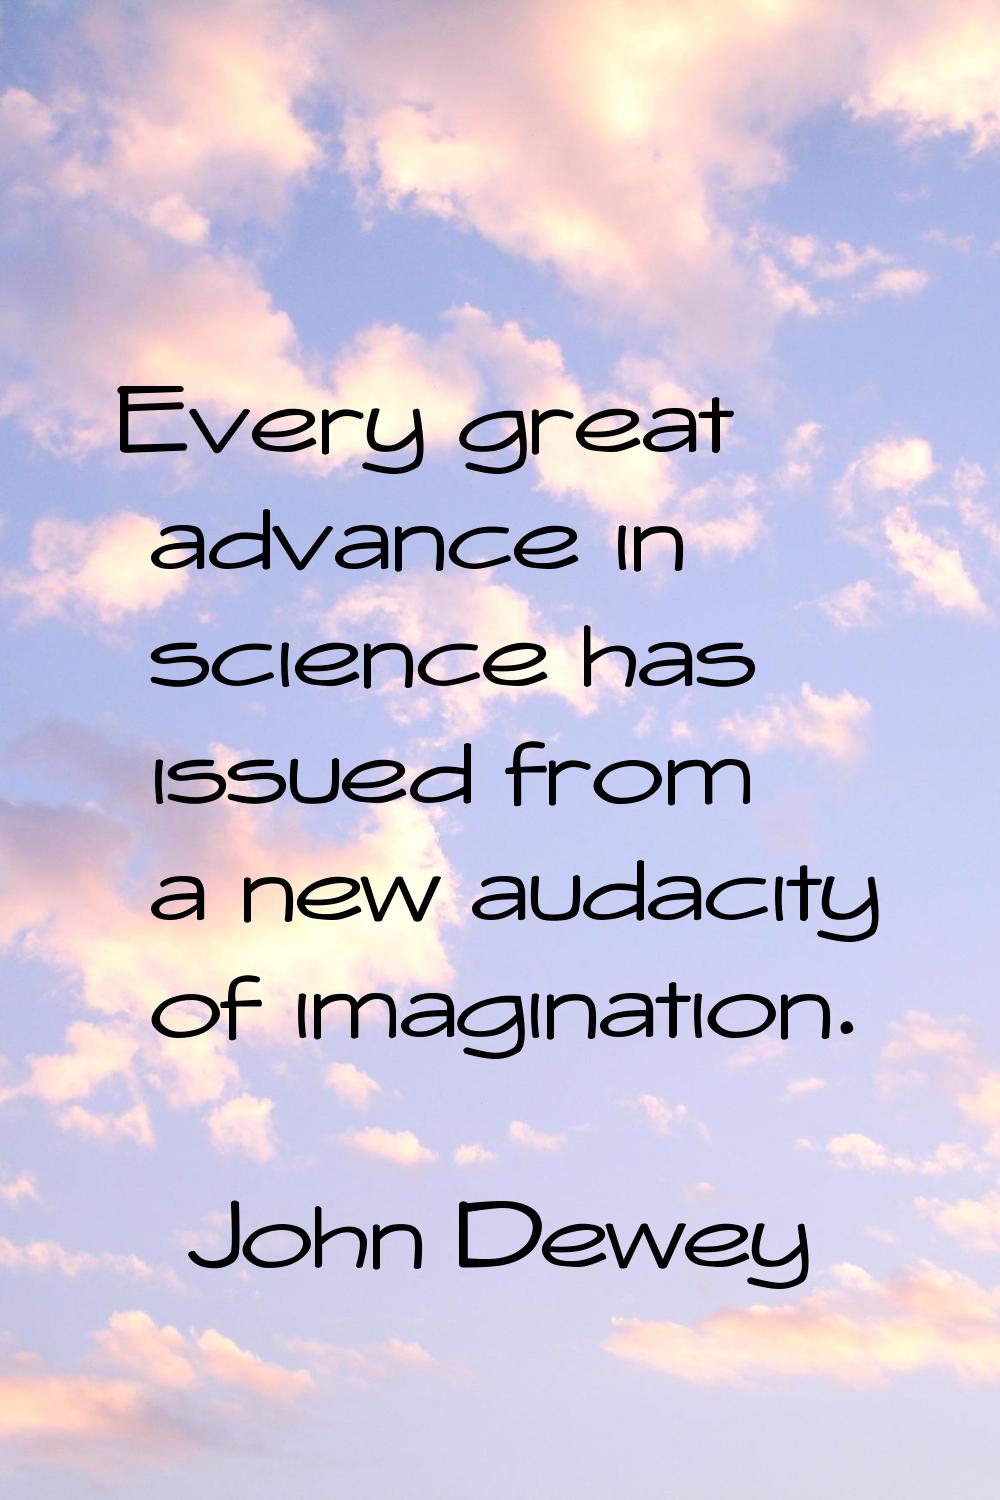 Every great advance in science has issued from a new audacity of imagination.